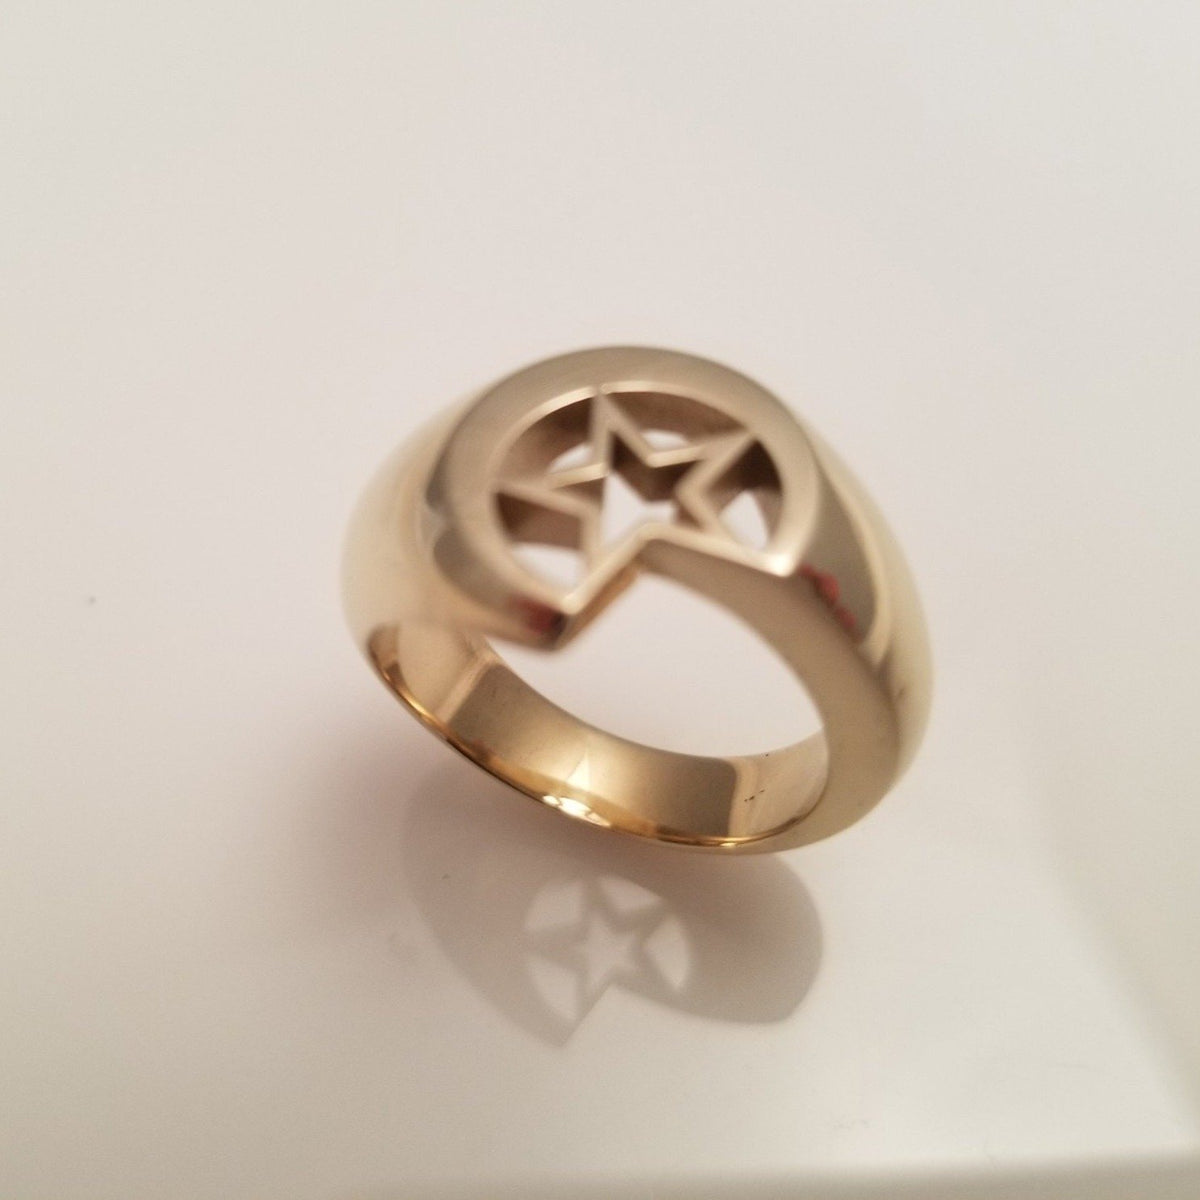 Solid star and moon ring gold color